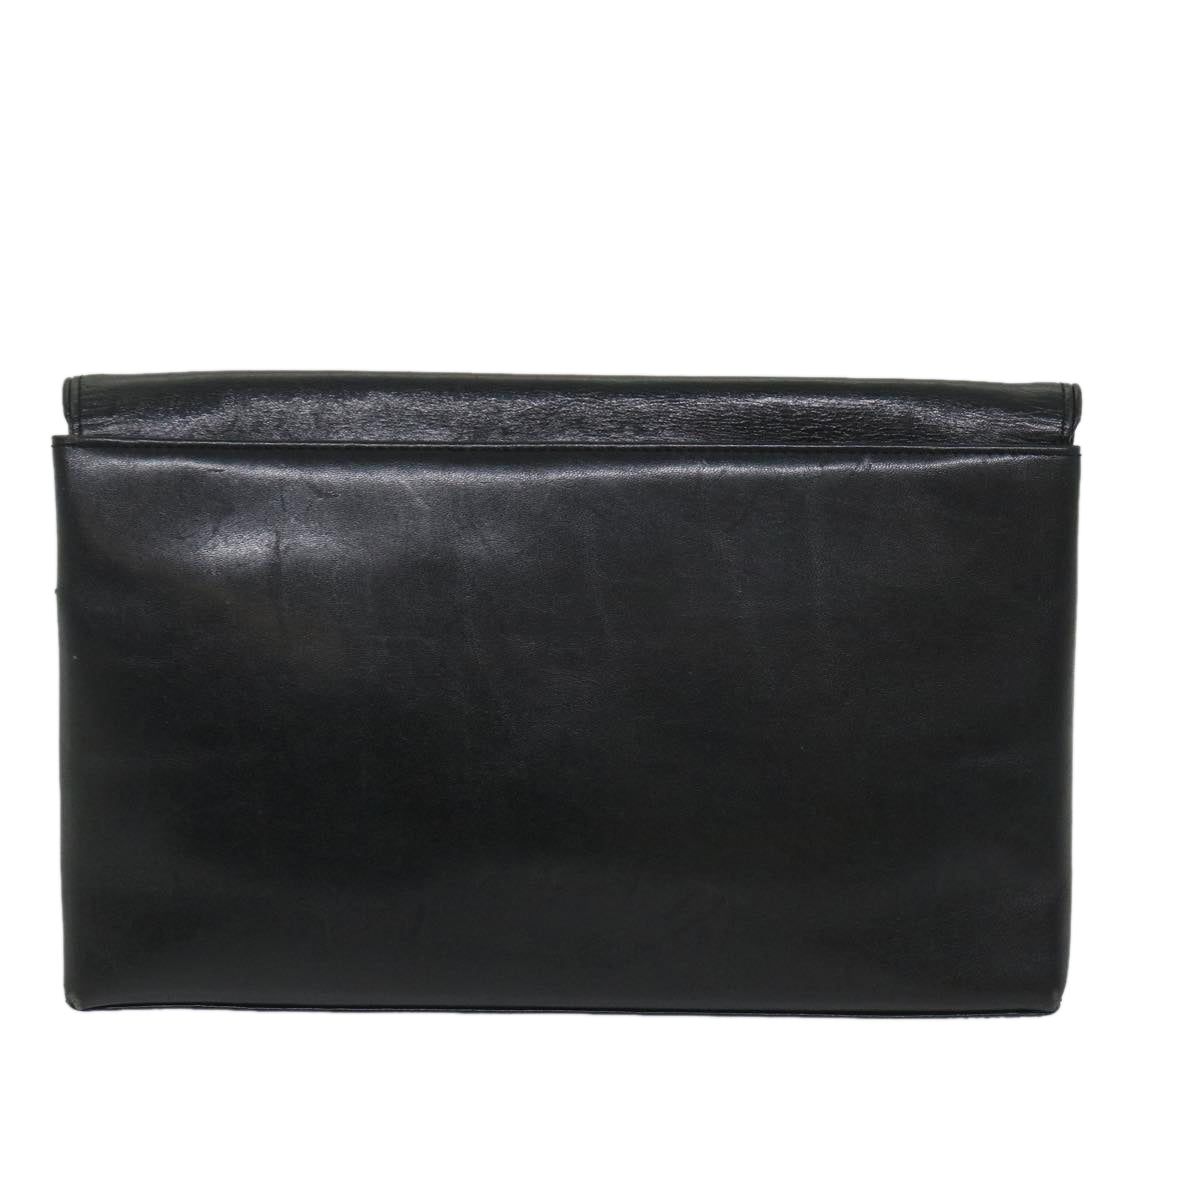 GIVENCHY Clutch Bag Leather Black Auth bs9173 - 0